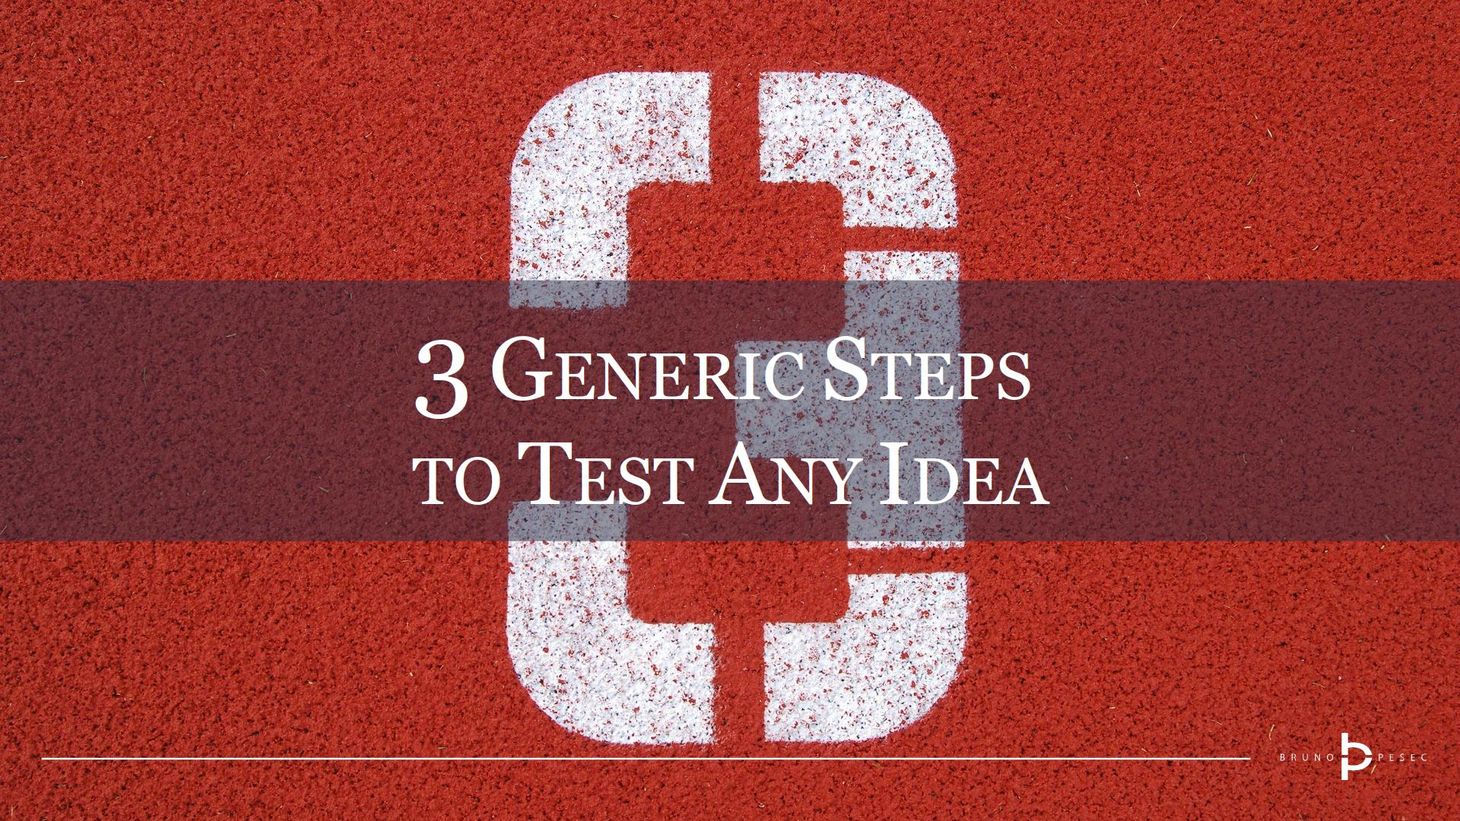 3 generic steps to test any idea